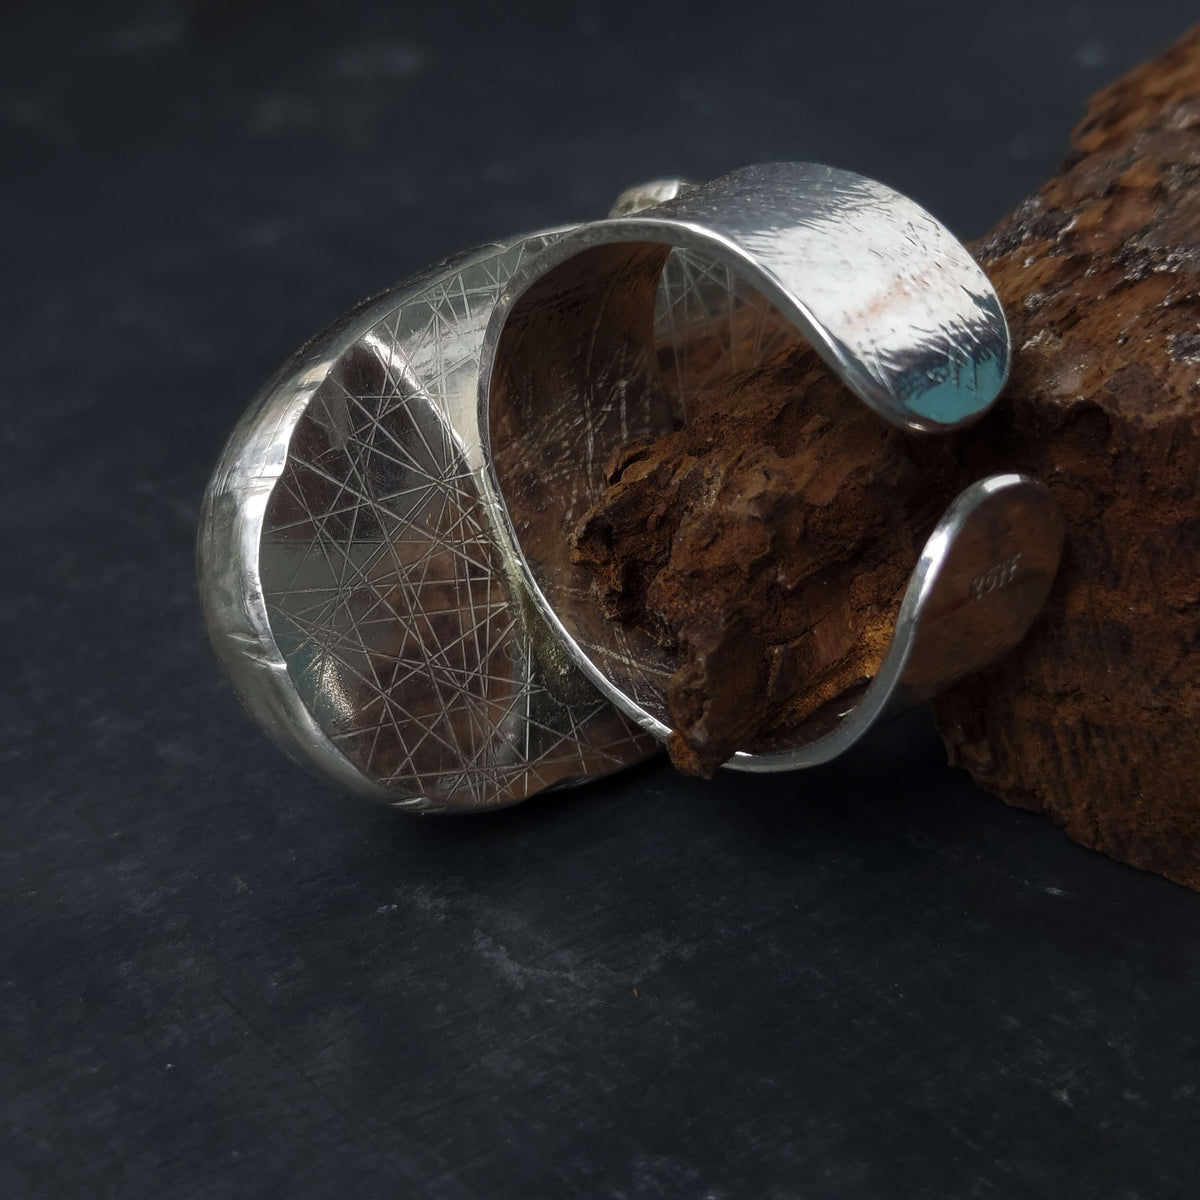 geometric lines on sterling silver ring, adjustable ring with jasper. handmade by roffjewellery.com